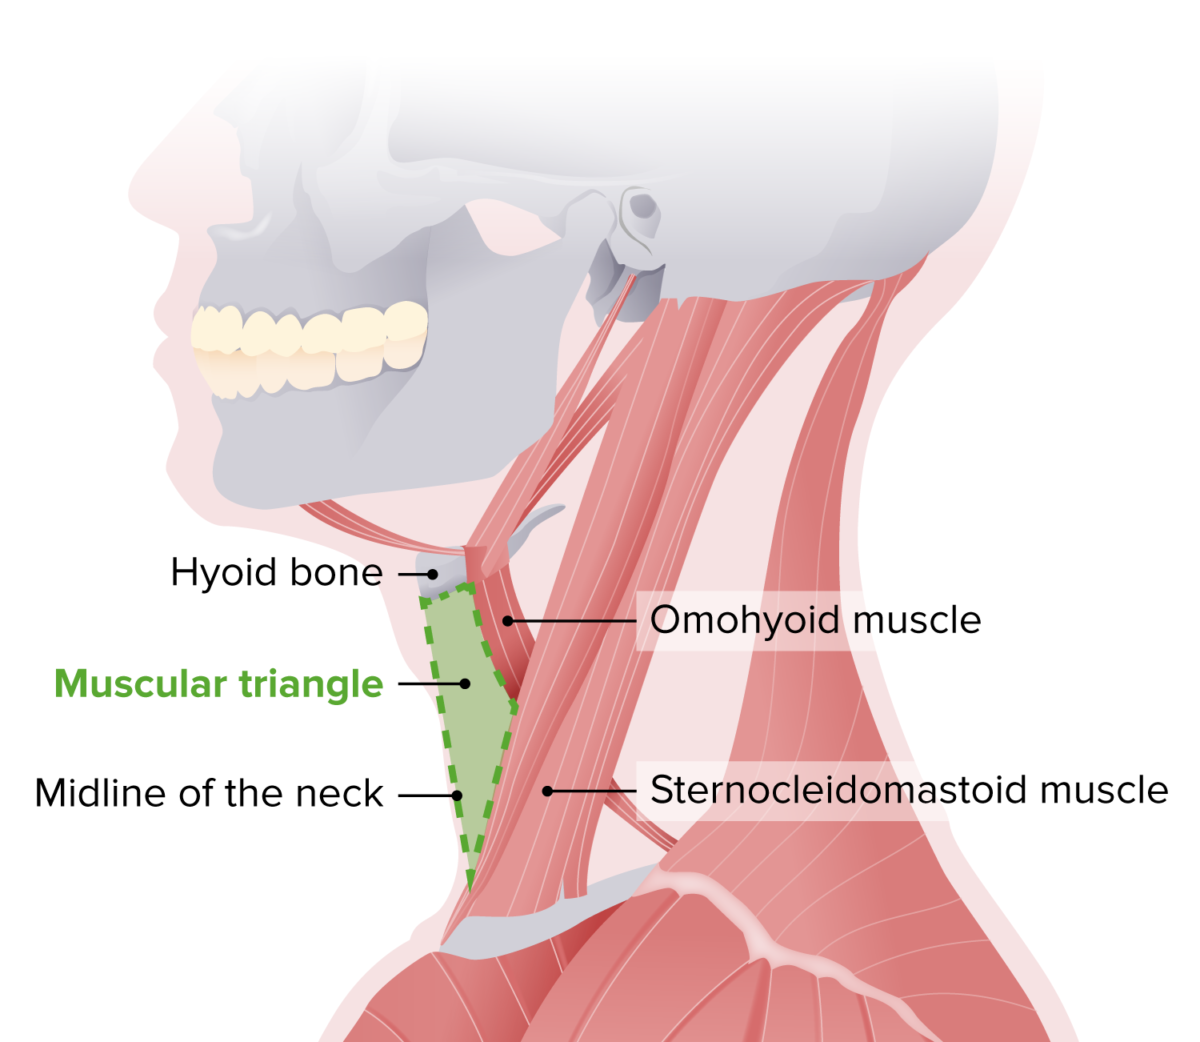 Muscular triangle of the neck